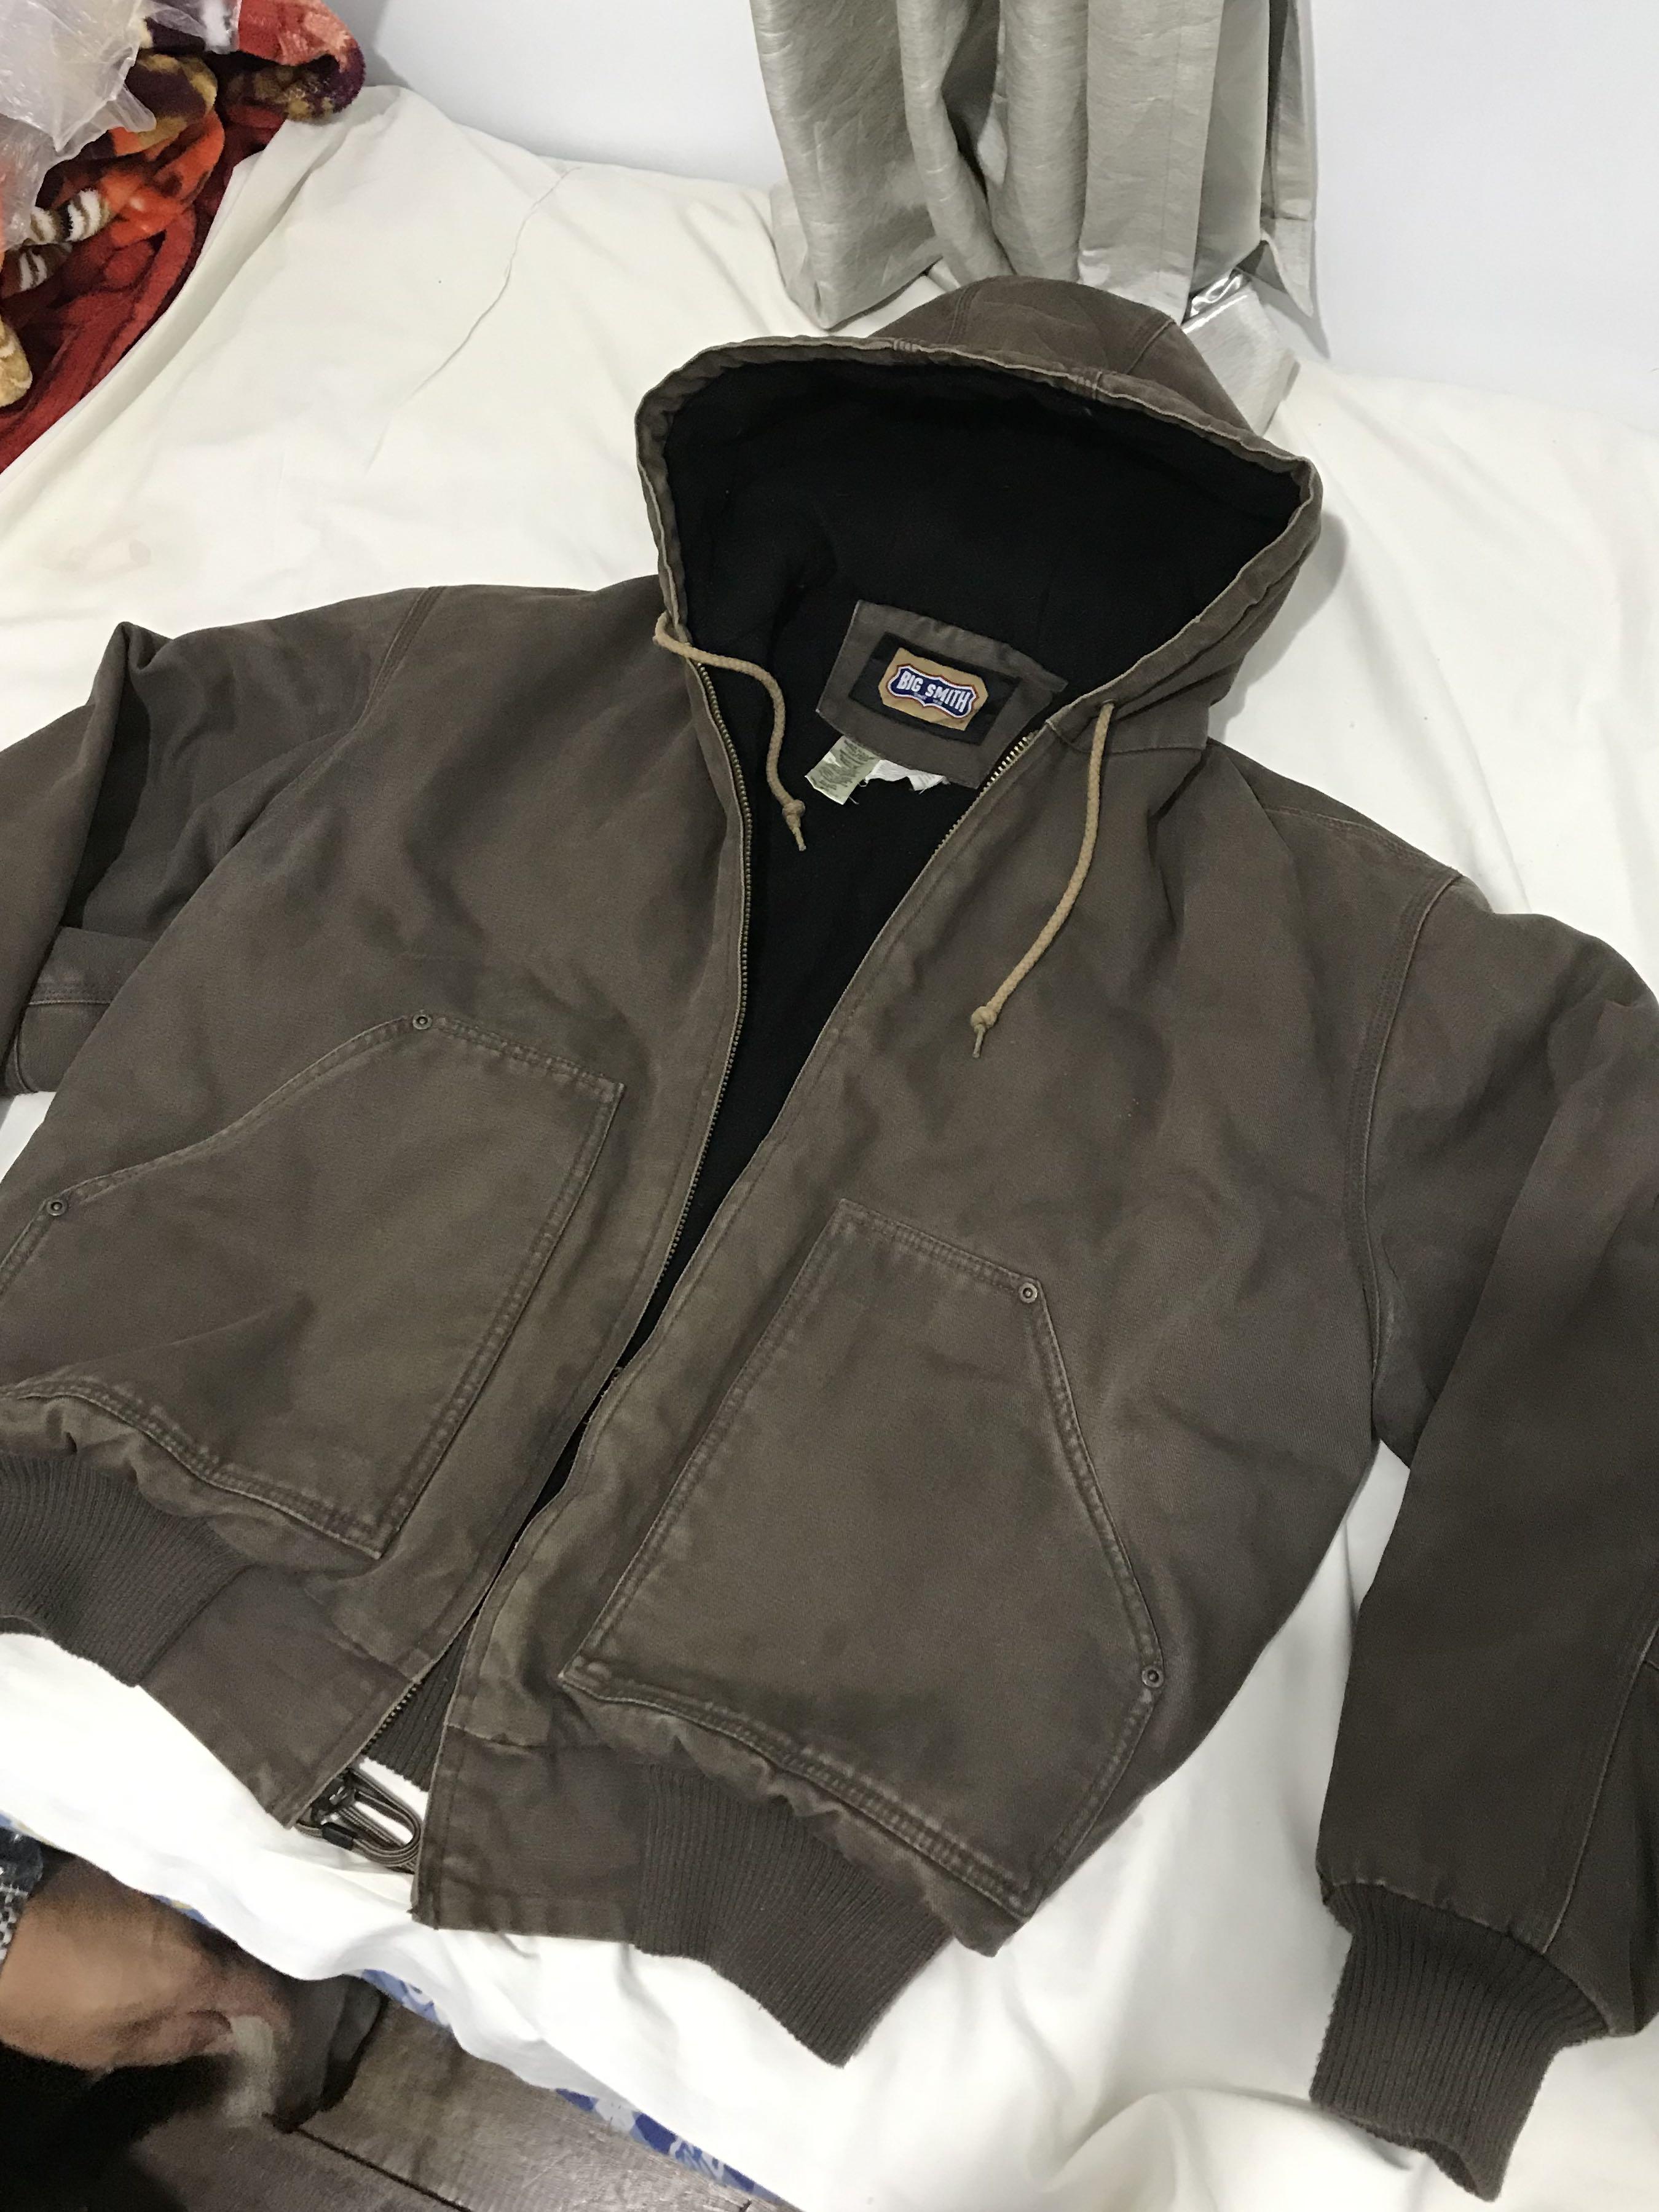 BIG SMITH JACKET, Men's Fashion, Coats, Jackets and Outerwear on Carousell